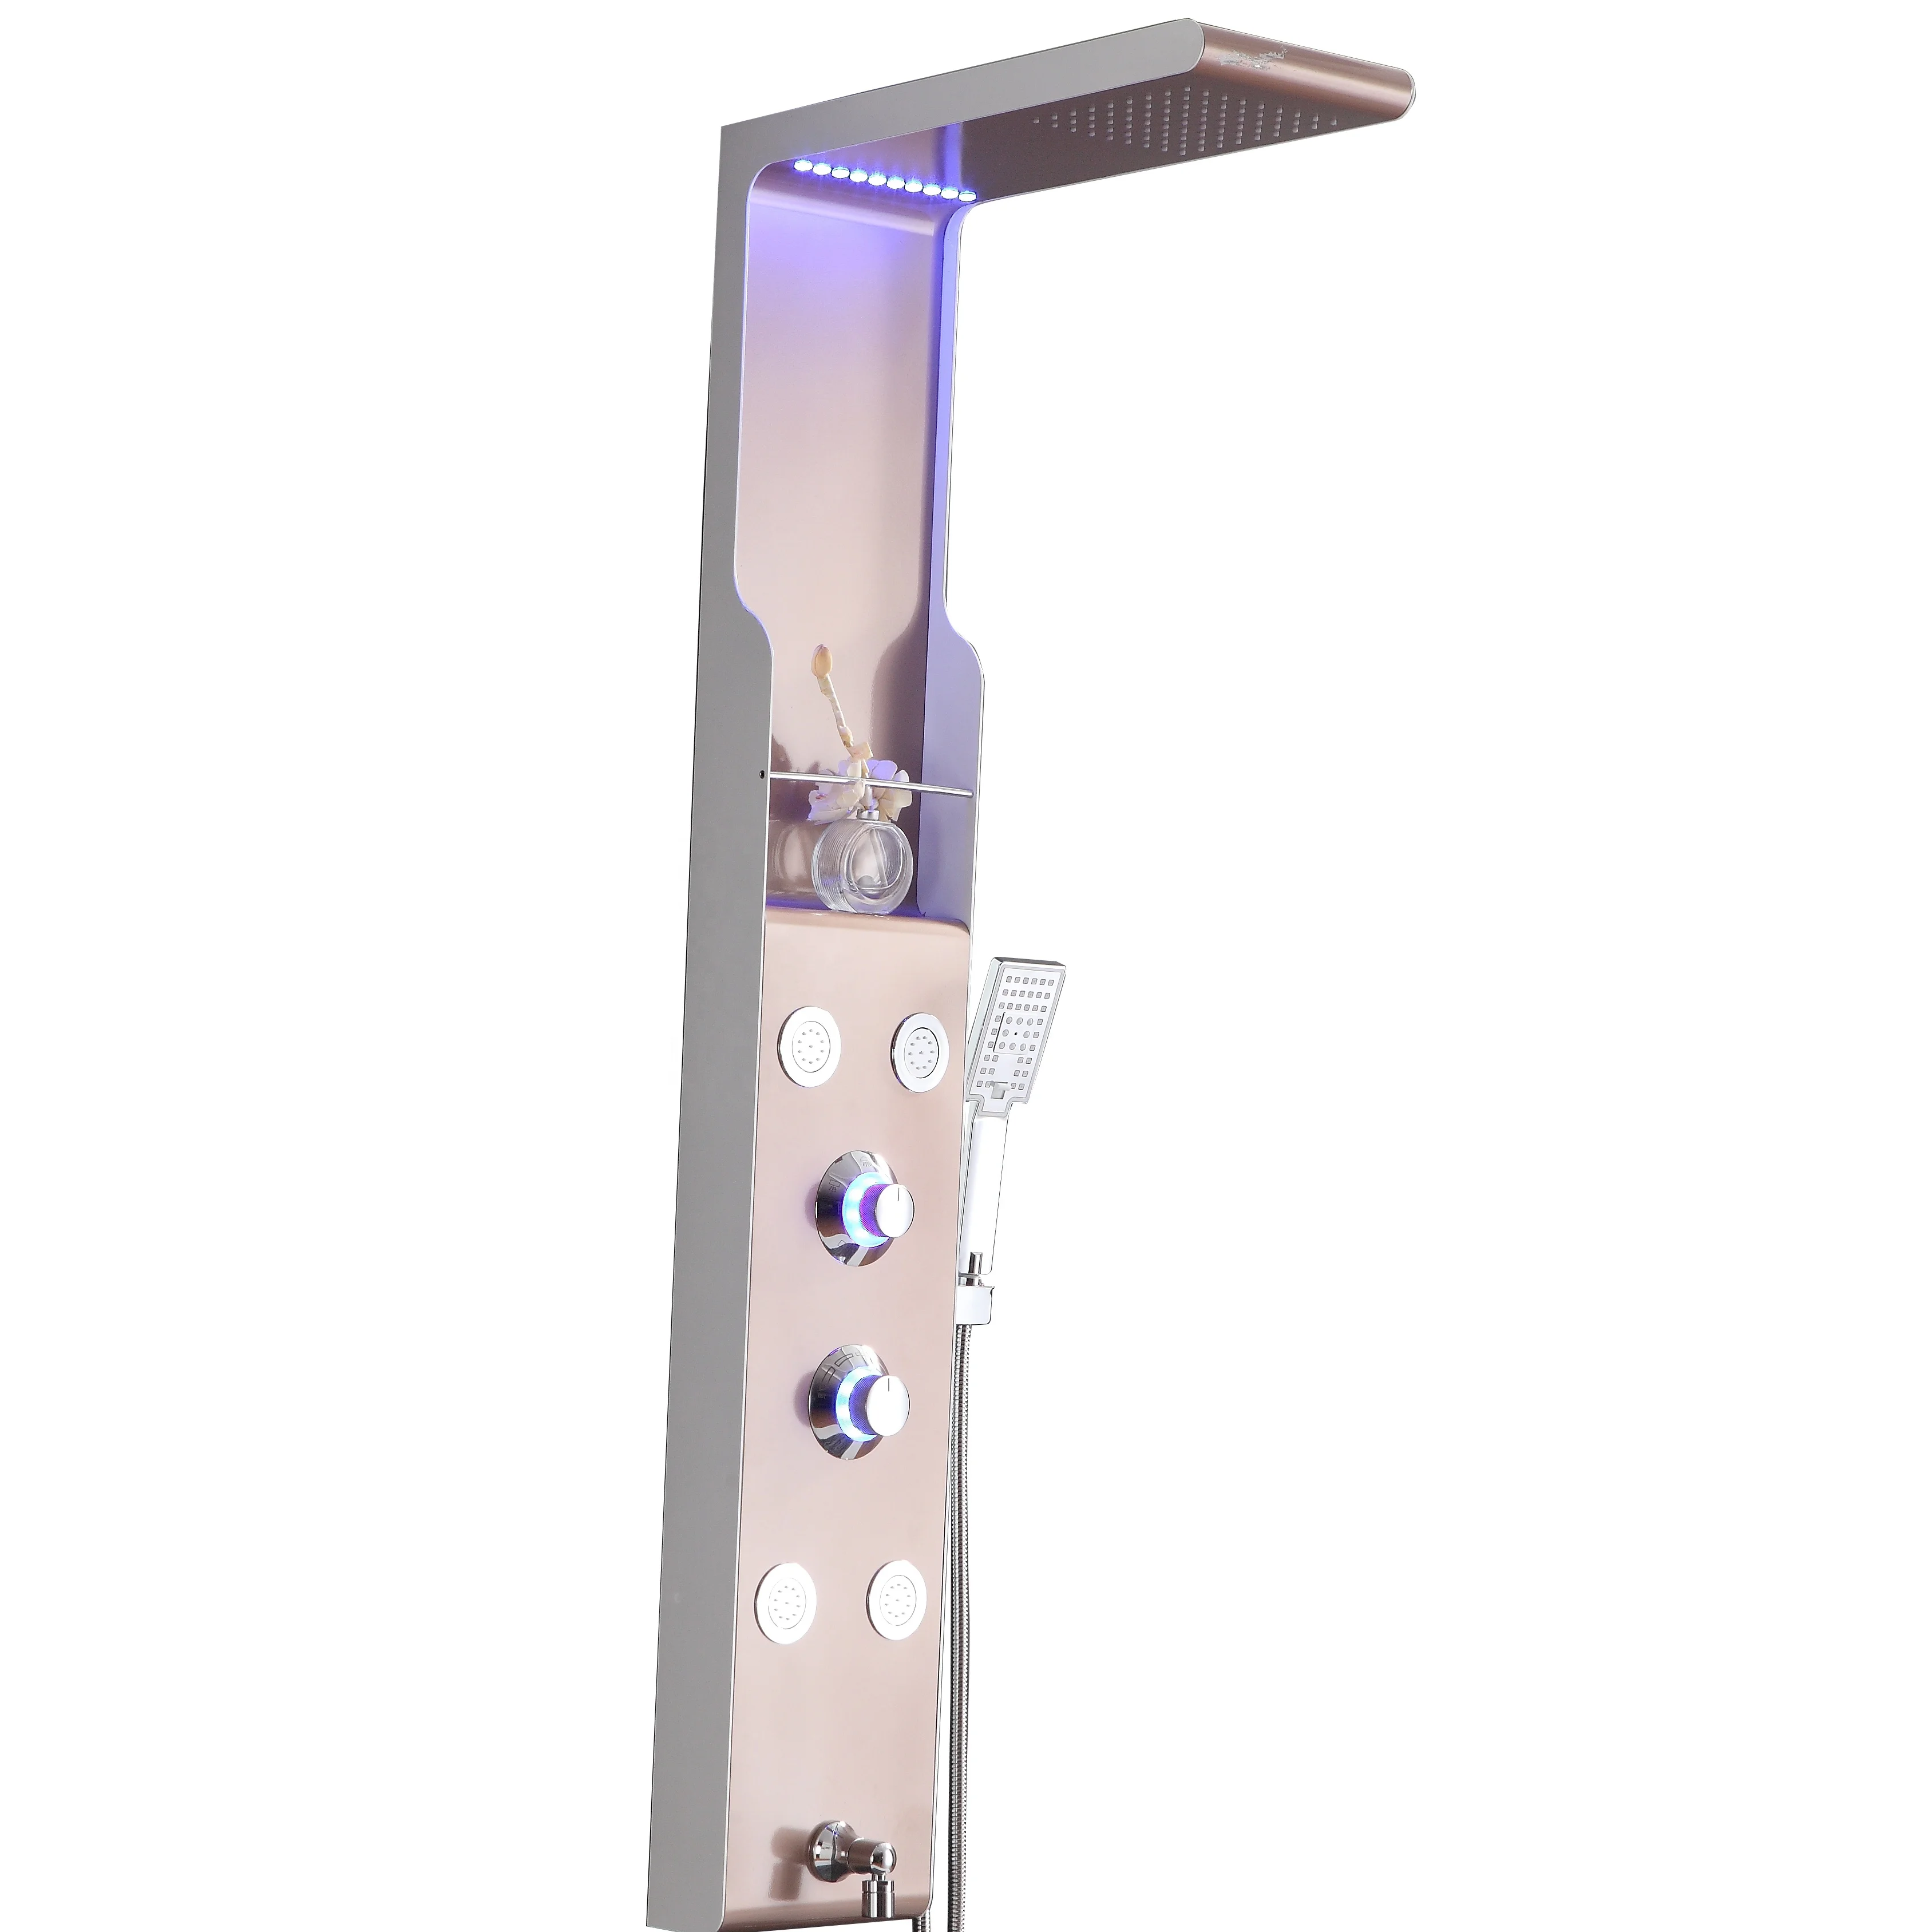 China Hot sale cheap 304 stainless steel massage jets waterfall led light shower columns panels rose pink